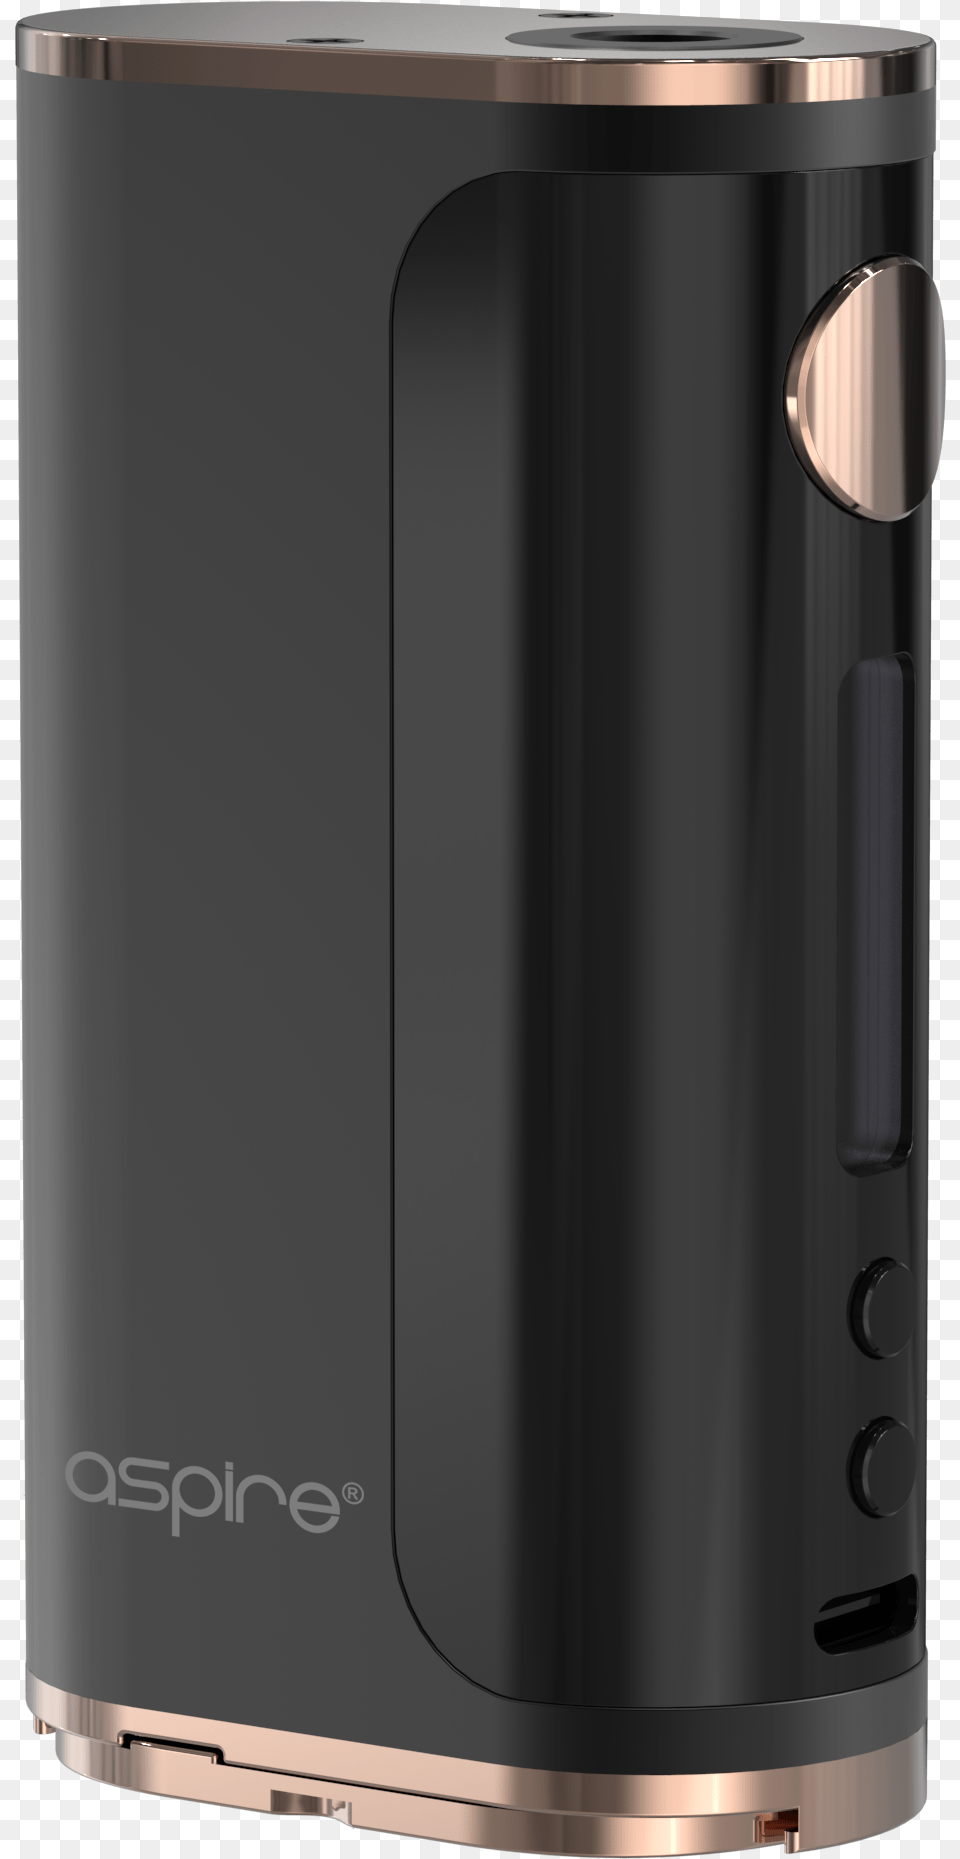 Aspire Glint 75w Mod Only Gadget, Mailbox, Device, Appliance, Electrical Device Png Image